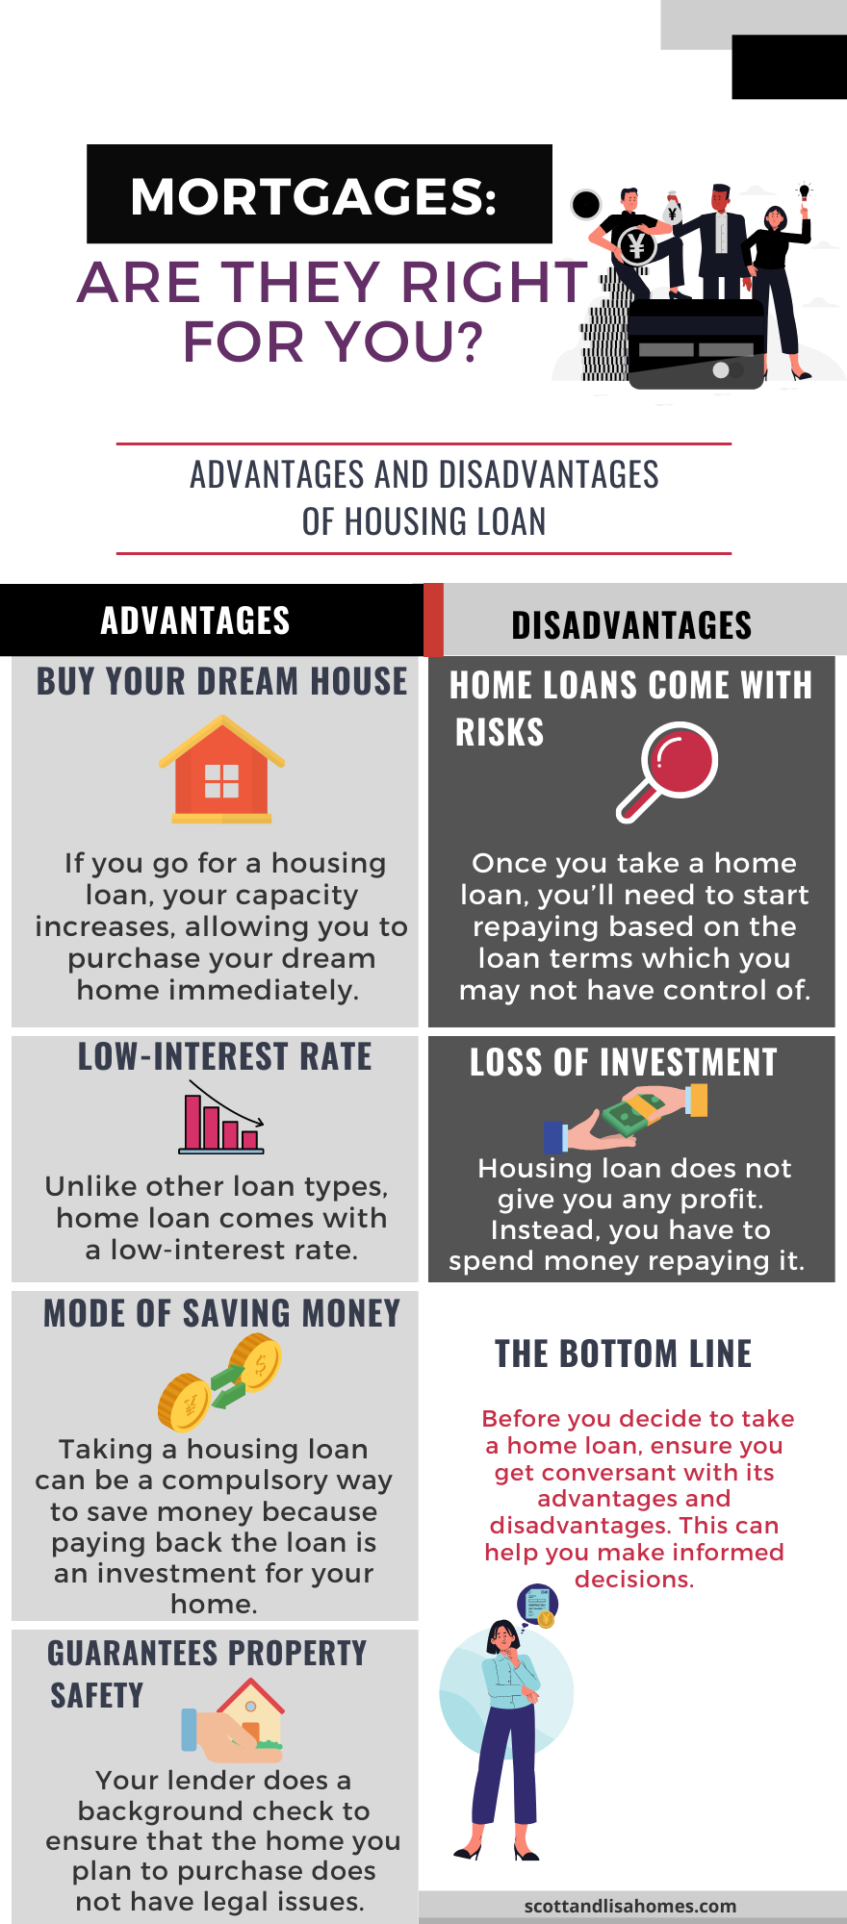 What are the Advantages and Disadvantages of a Home Loan?